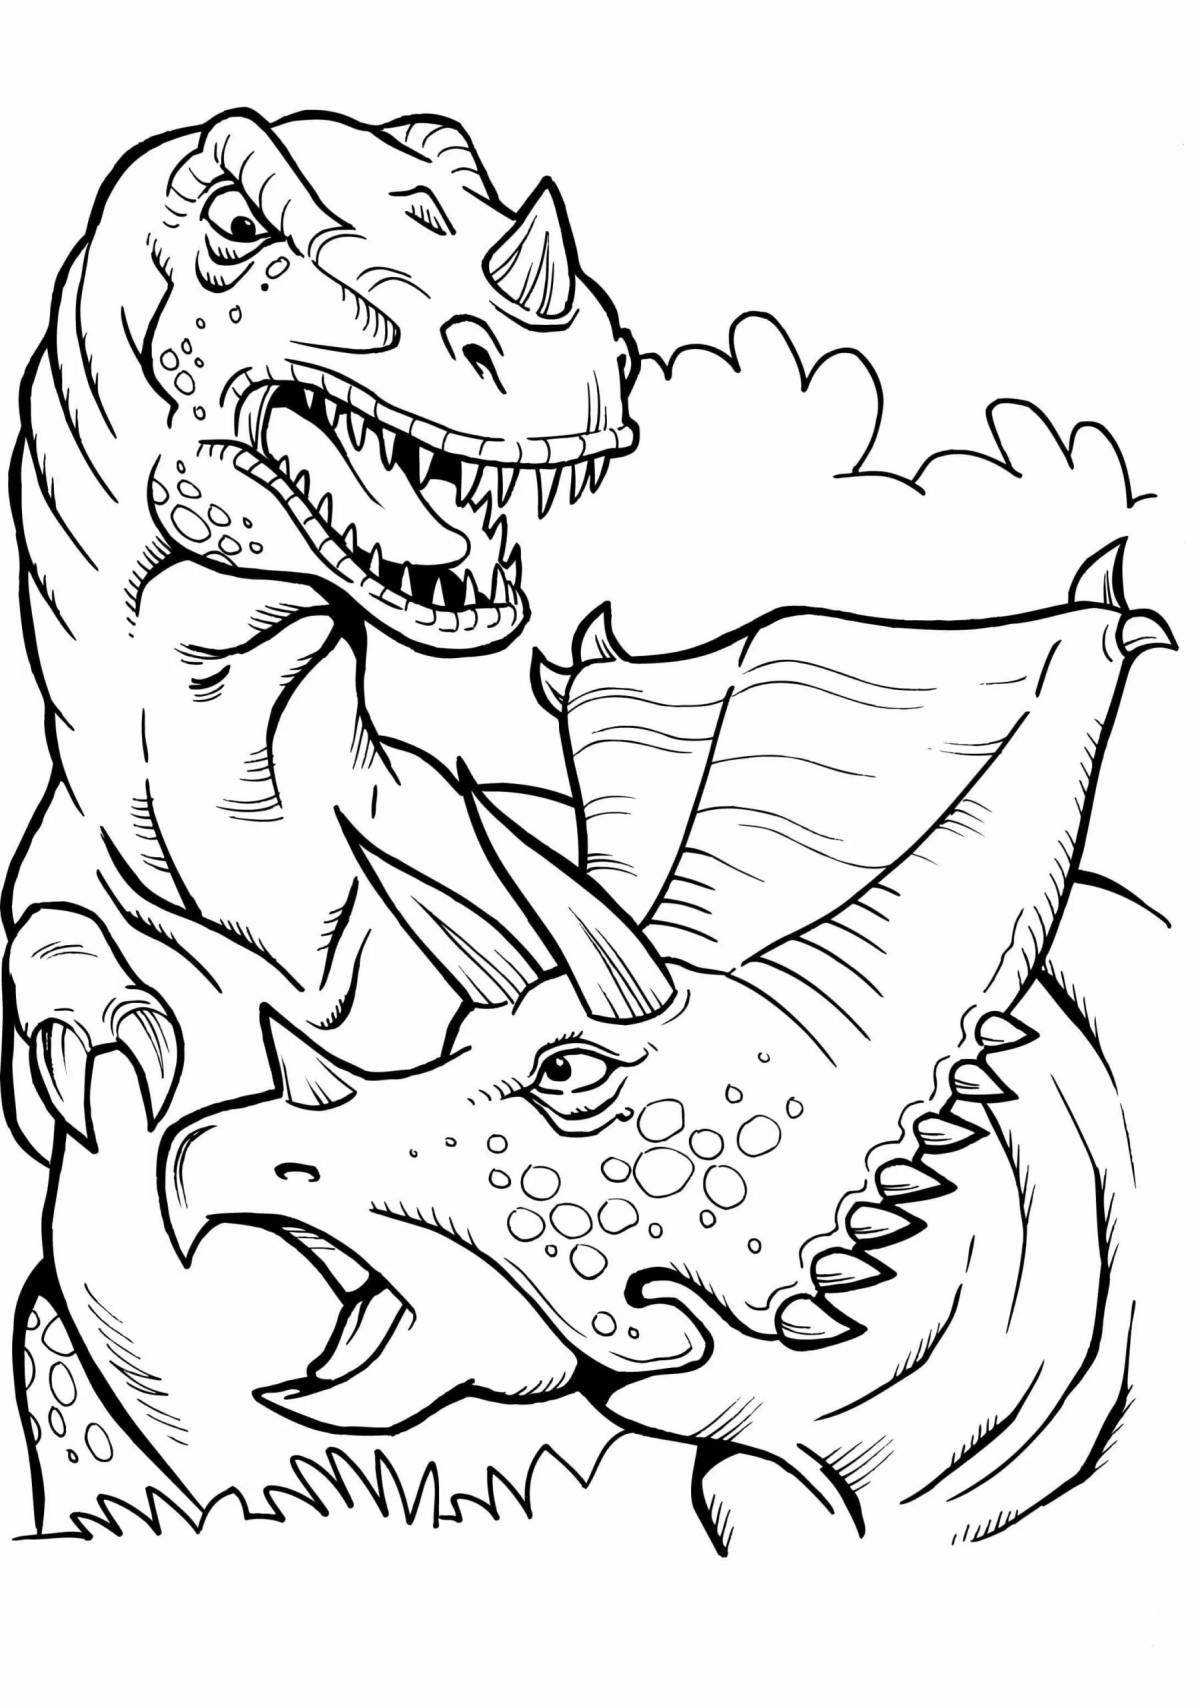 Fierce angry dinosaur coloring page